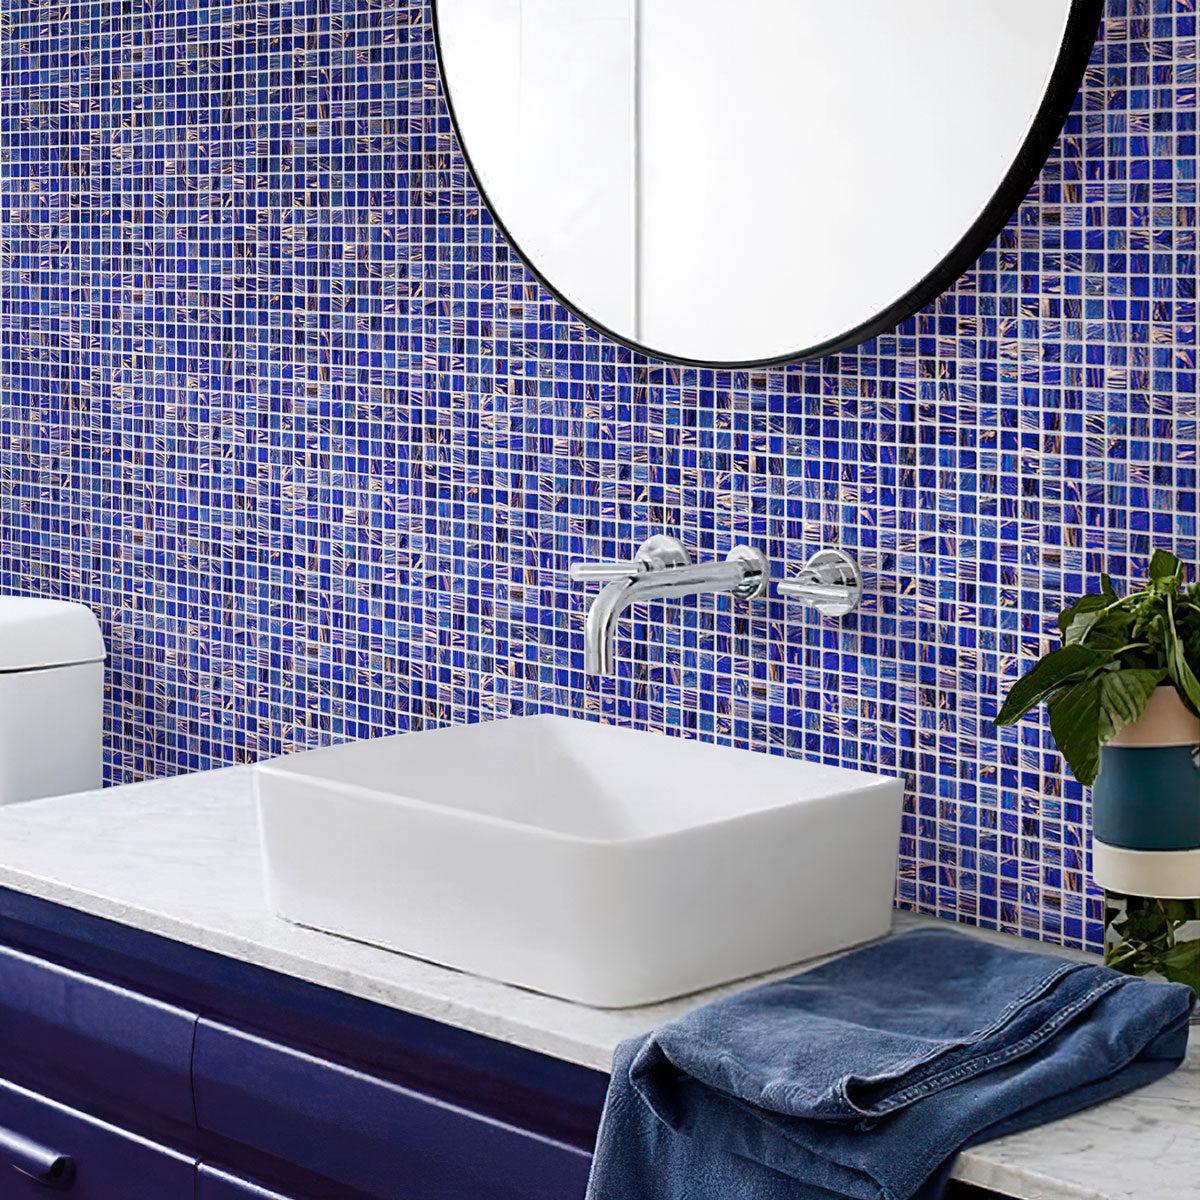 Denim Blue Mixed Squares Glass Tile adds a contemporary feel to bathroom